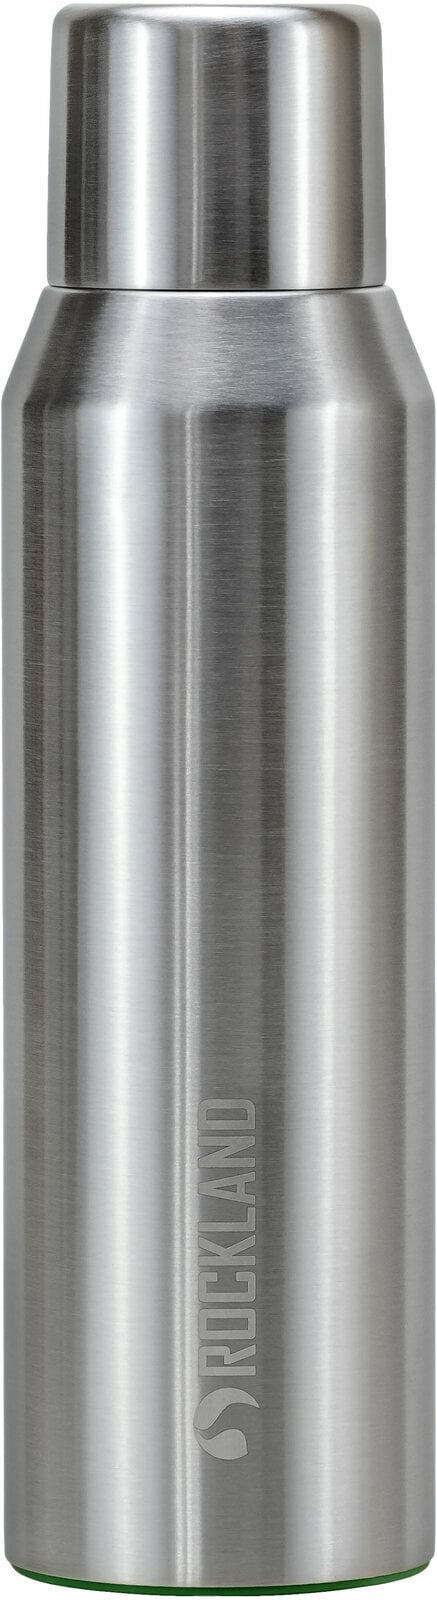 Thermo Rockland Galaxy Vacuum Flask 1 L Silver Thermo